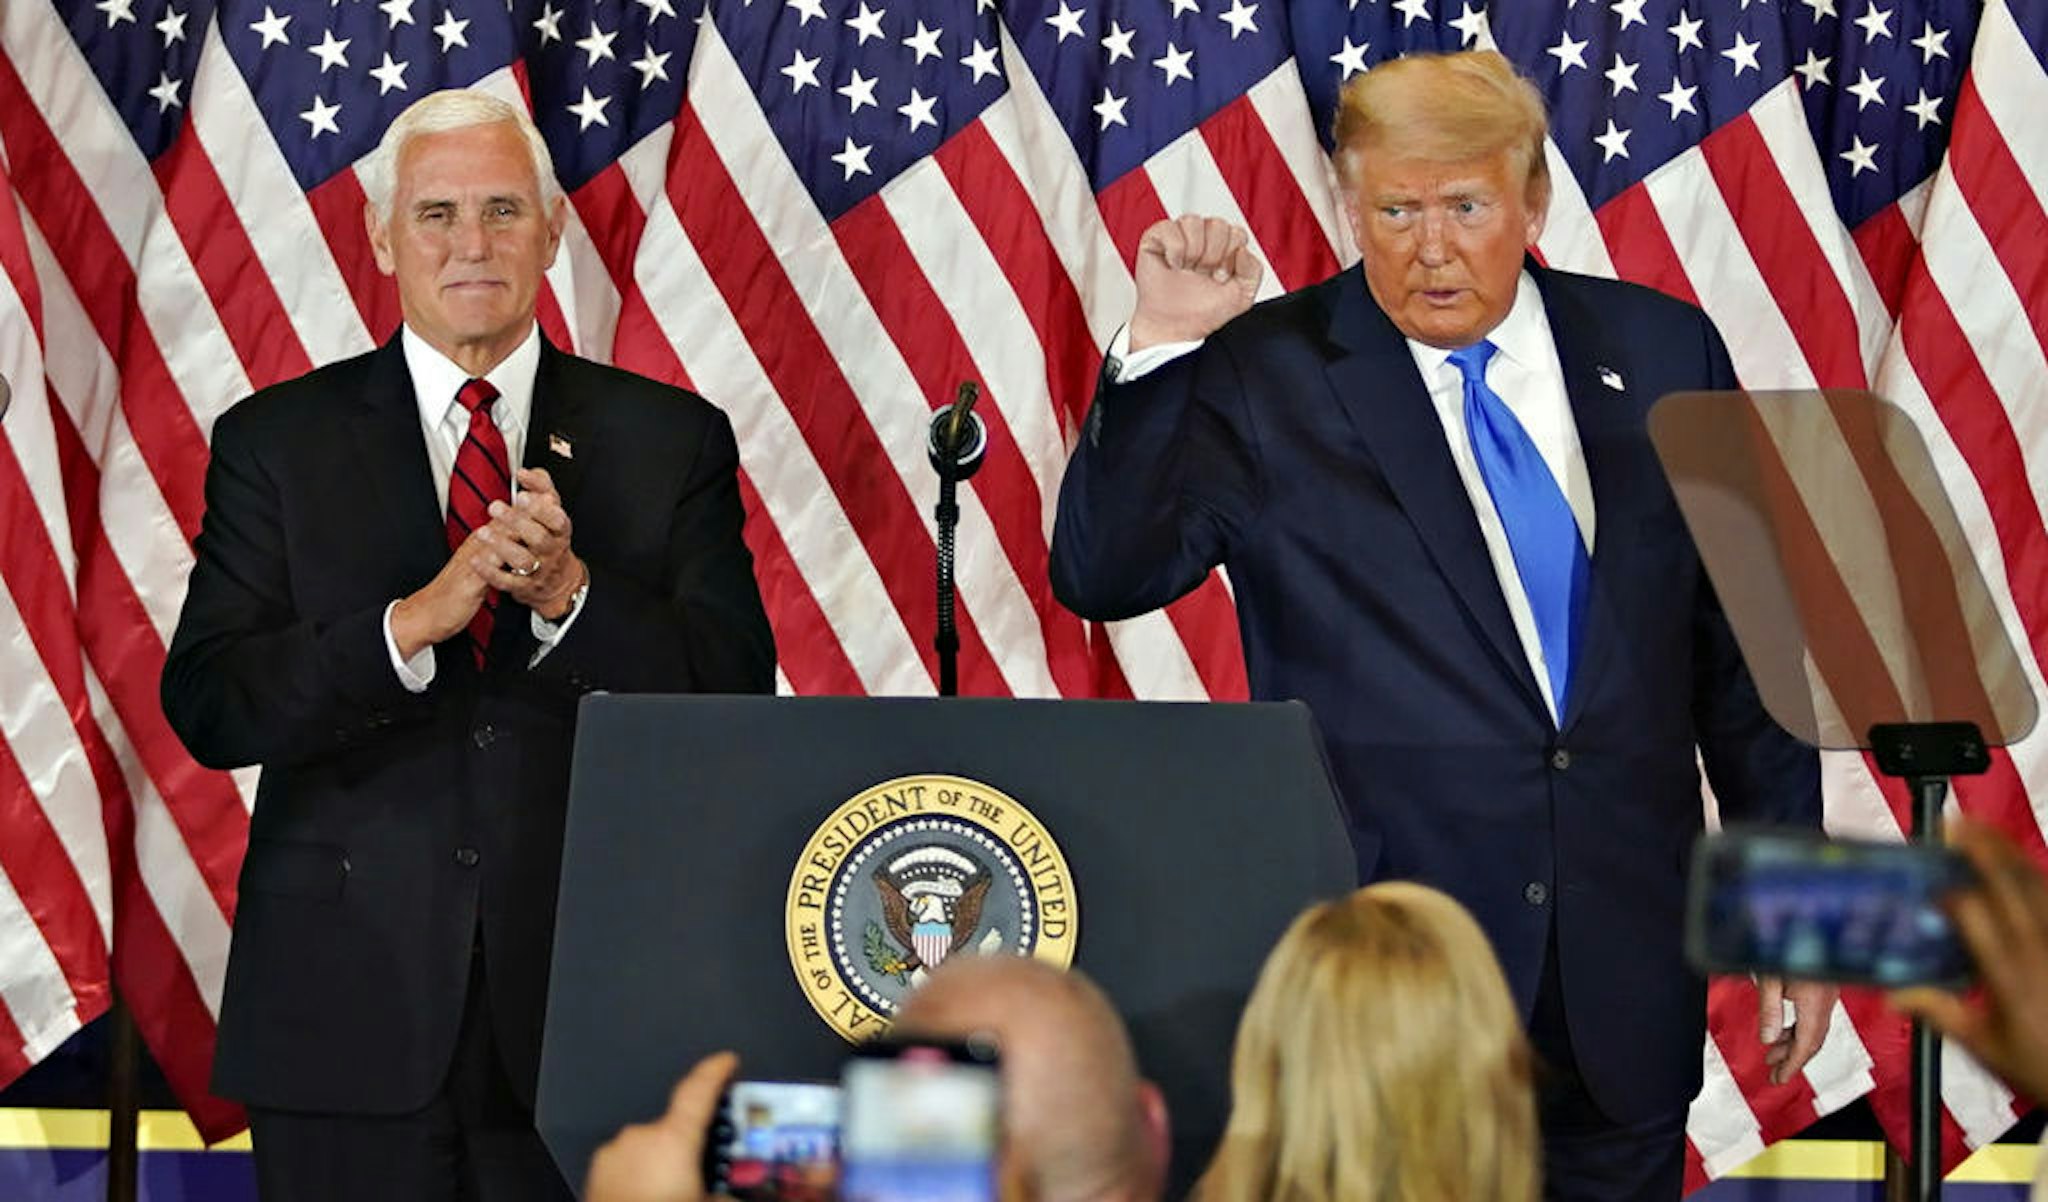 U.S. President Donald Trump gestures after speaking during an election night party with U.S. Vice President Mike Pence, left, in the East Room of the White House in Washington, D.C., U.S., on Wednesday, Nov. 4, 2020. Trump declared he had won re-election against Joe Biden and said he would ask the Supreme Court to intervene, even as several battleground states continue to count votes. Photographer: Al Drago/Bloomberg